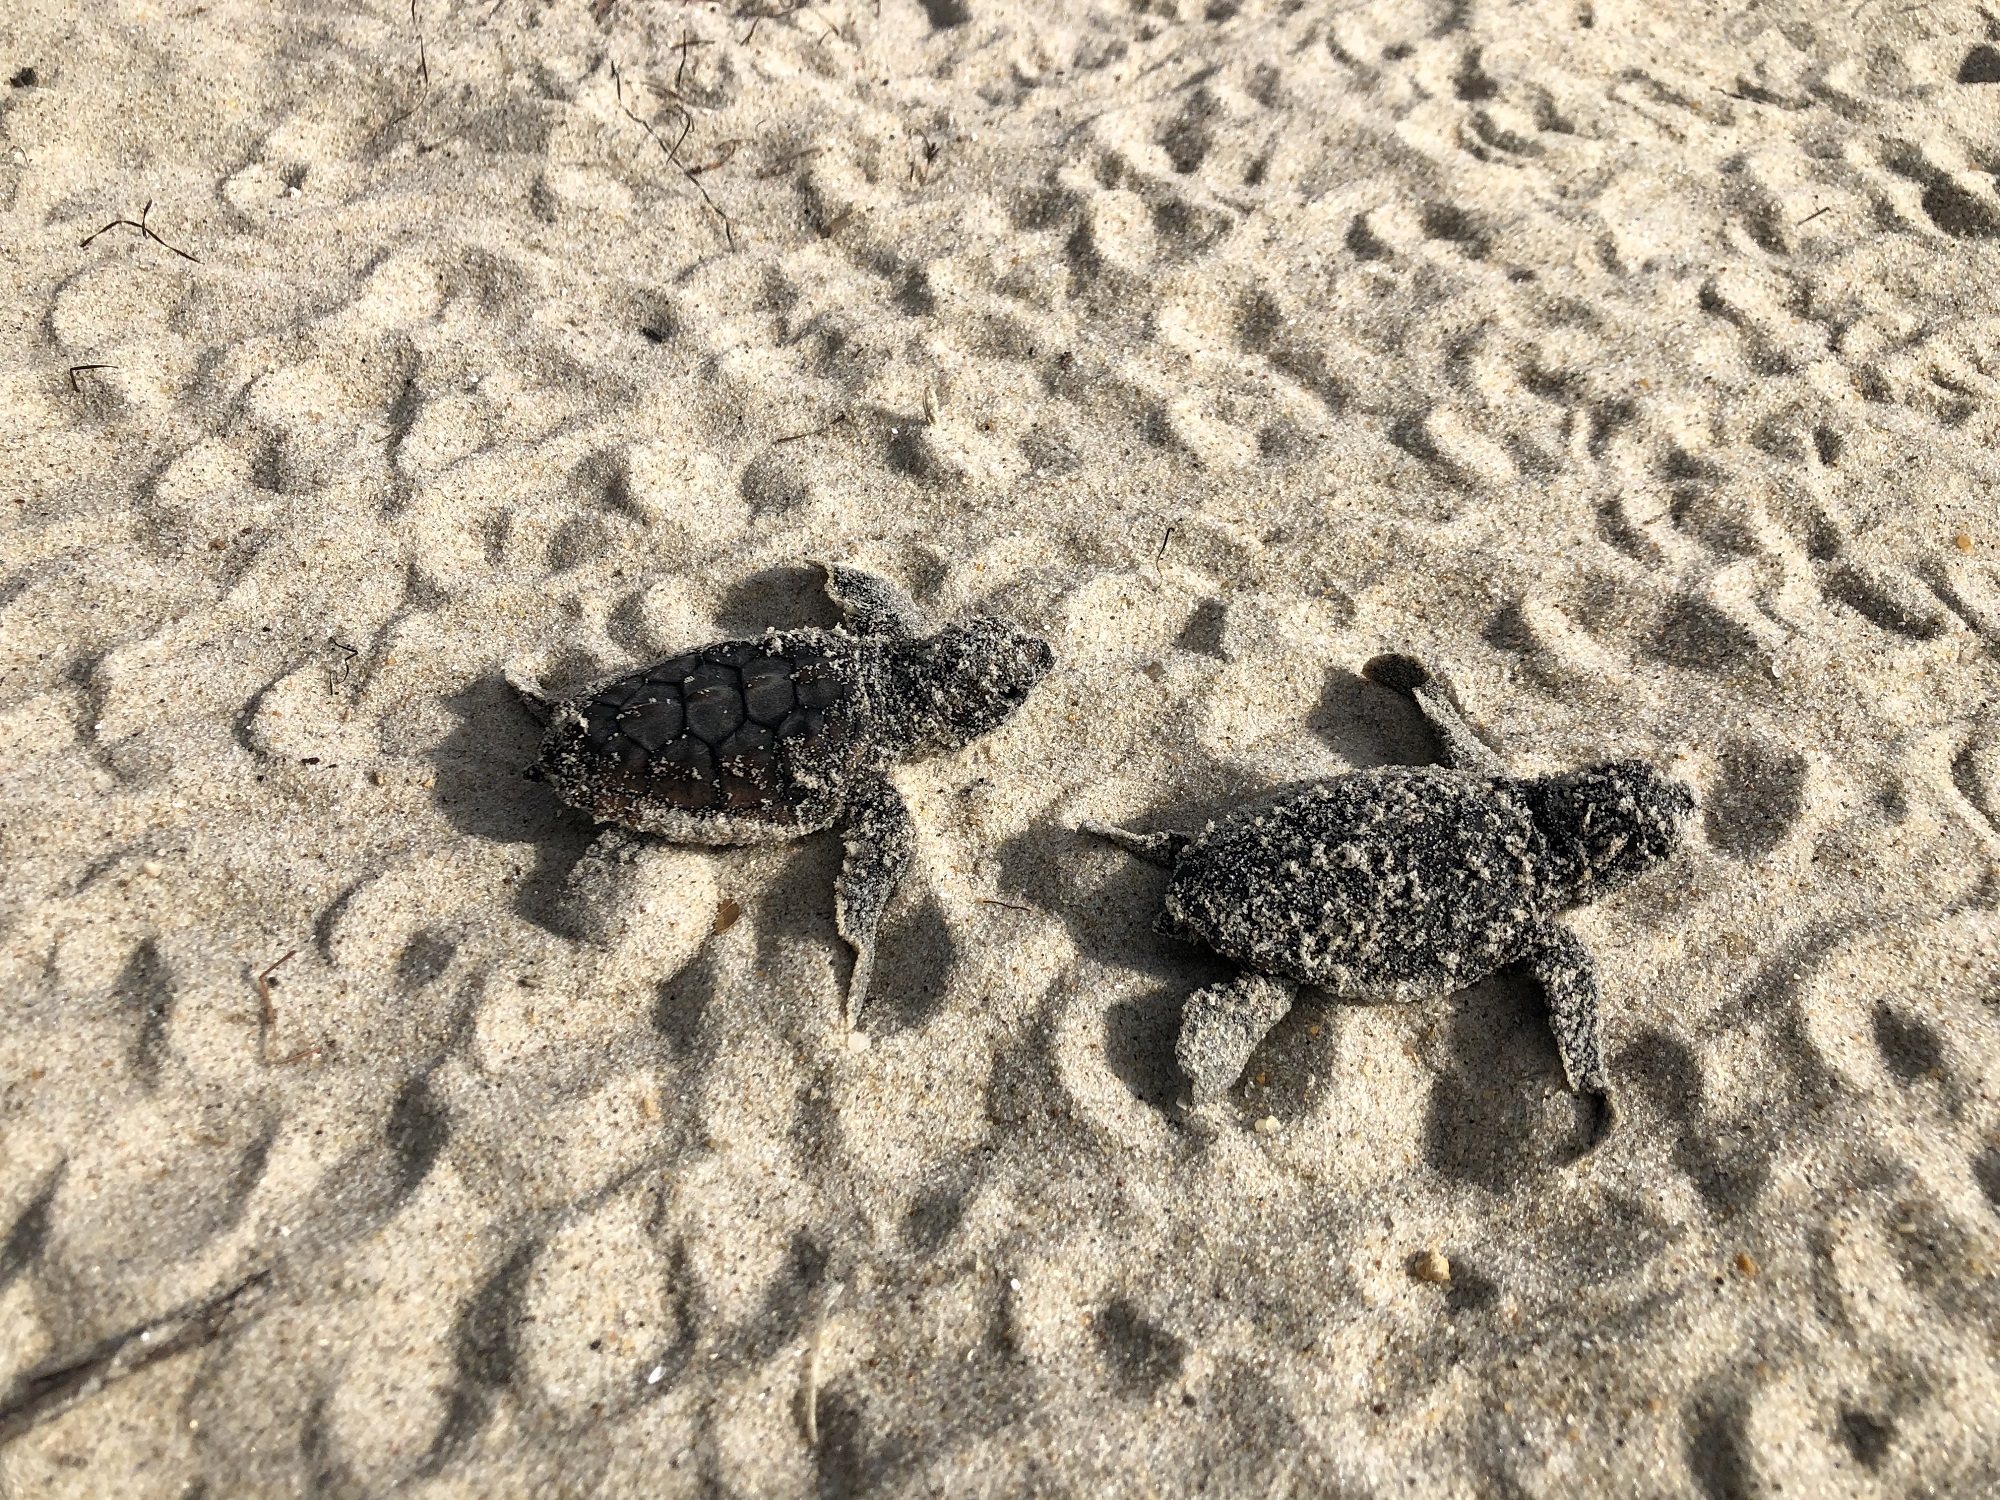 Two hatchling loggerhead sea turtles cross sand covered in other baby turtle tracks